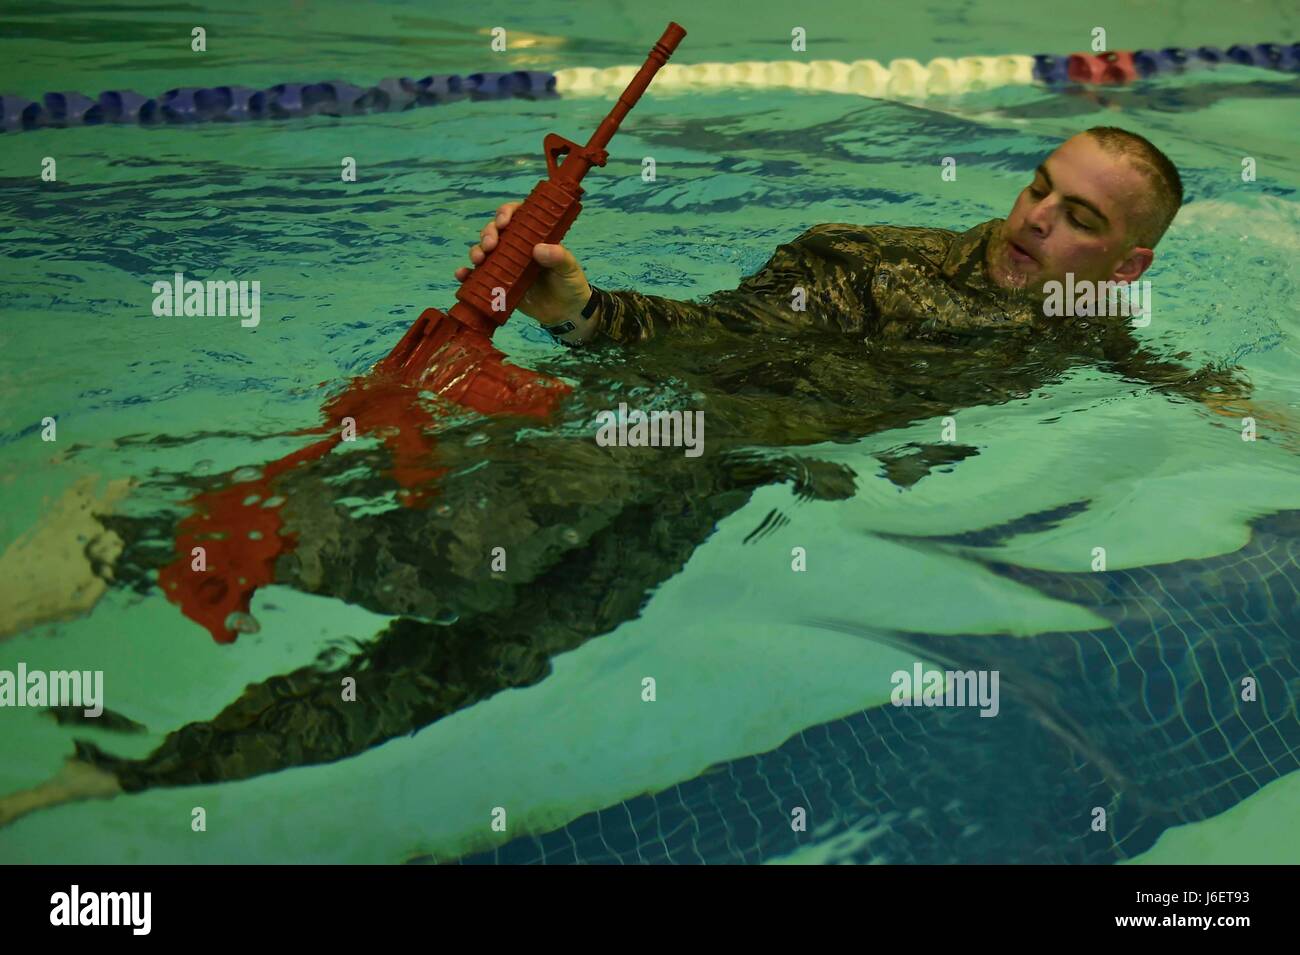 U.S. Air Force Tech. Sgt. George Daggett, 633rd Security Forces Squadron swing shift flight chief, performs a recovery swim during a training evolution at Joint Base Langley-Eustis, Va., April 28, 2017. The 633rd SFS Emergency Services Team conducted a test trial for a course future candidates will have to accomplish in order to join the EST ranks. (U.S. Air Force photo/Senior Airman Derek Seifert) Stock Photo